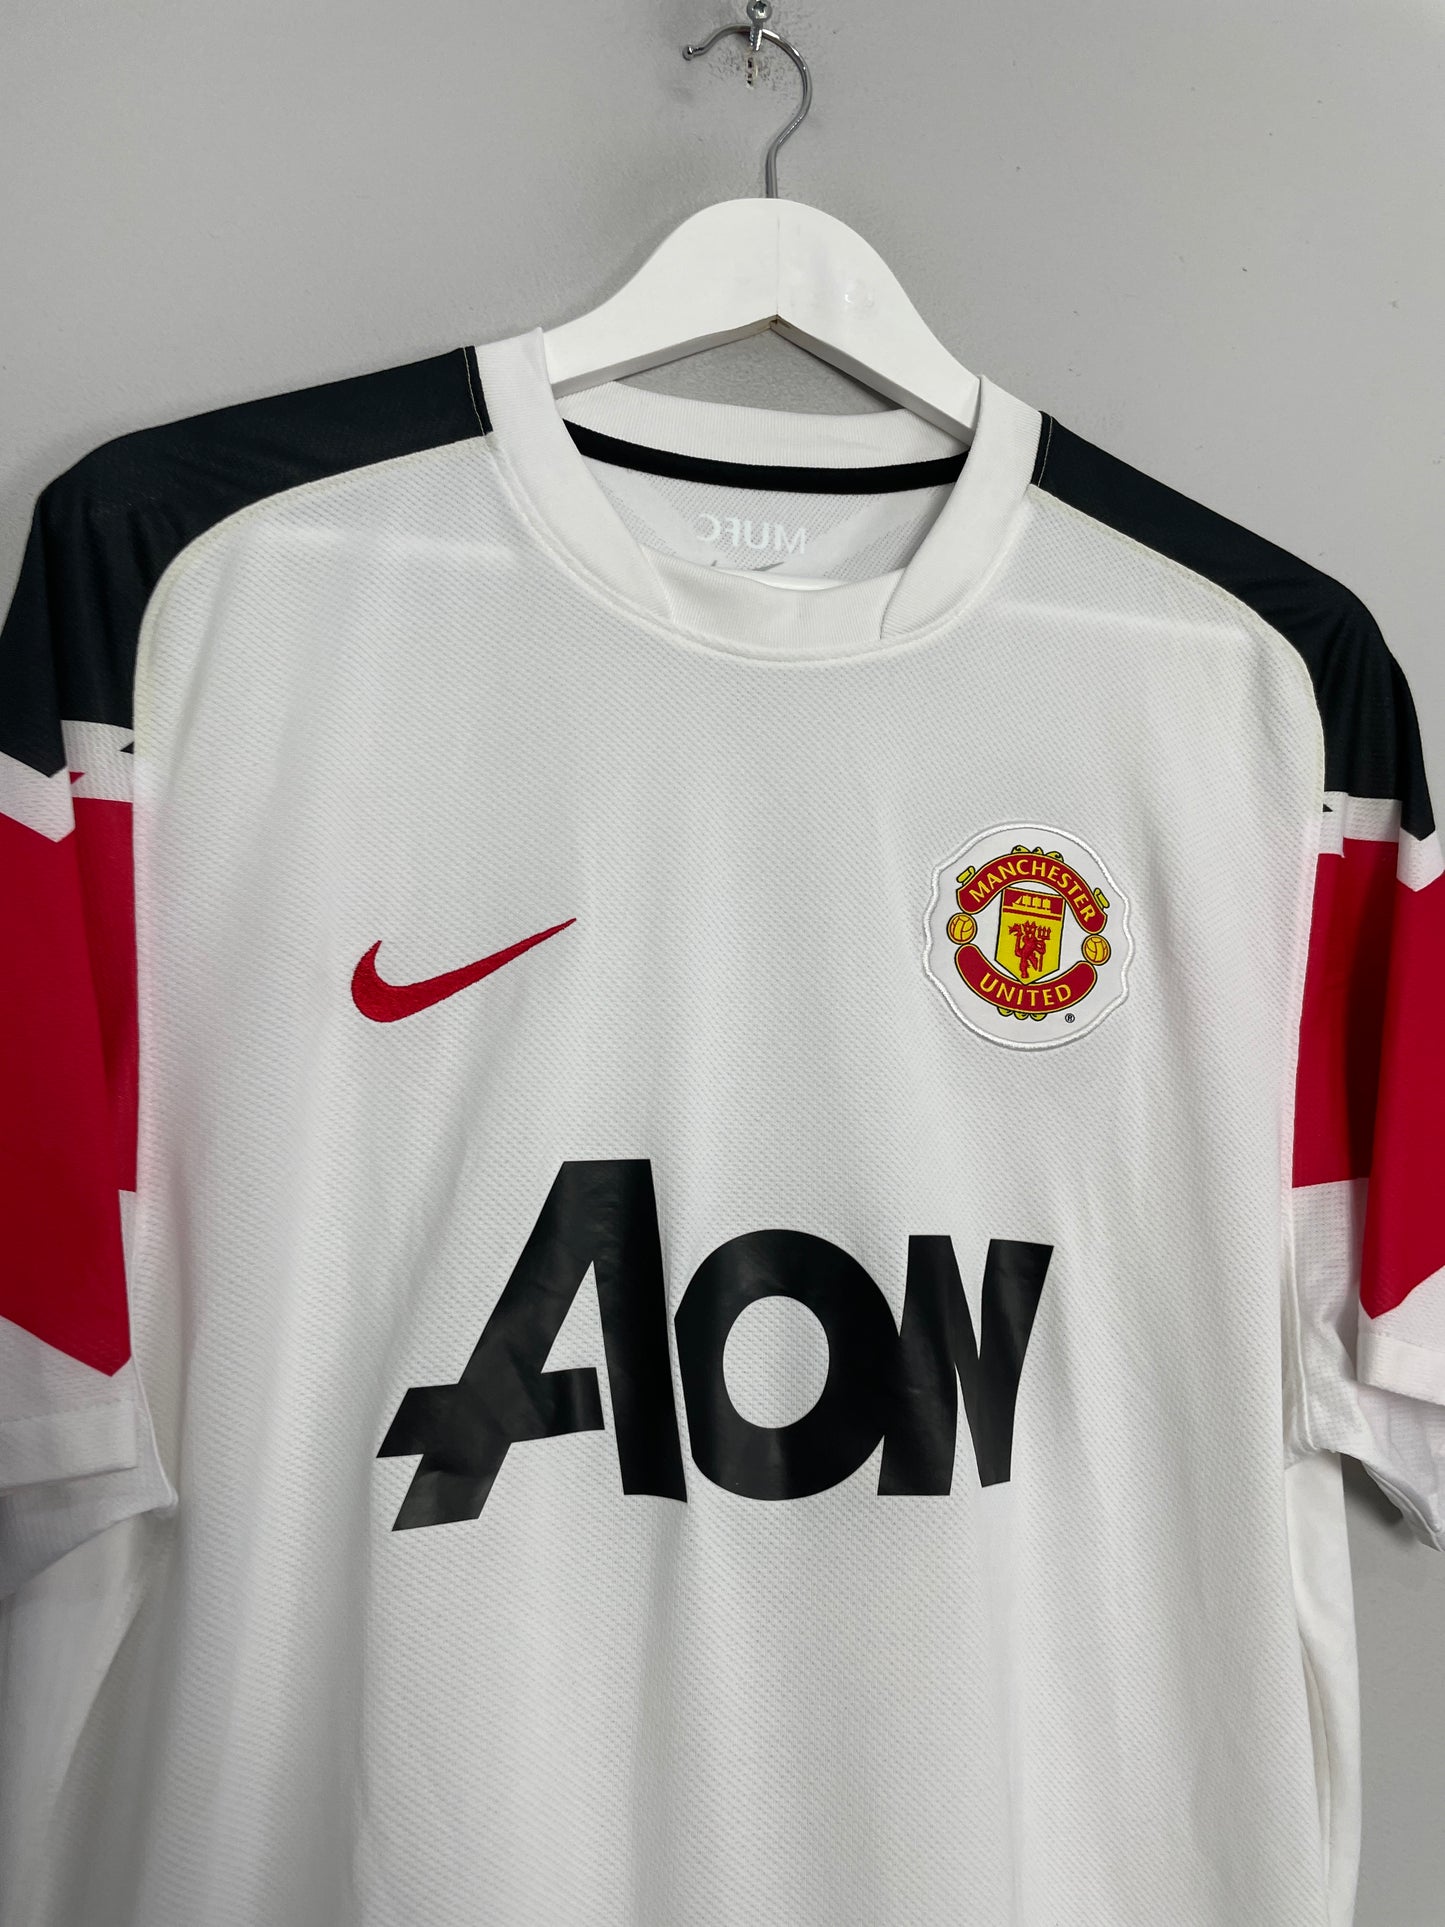 2010/12 MANCHESTER UNITED GIGGS #11 AWAY SHIRT (L) ADIDAS